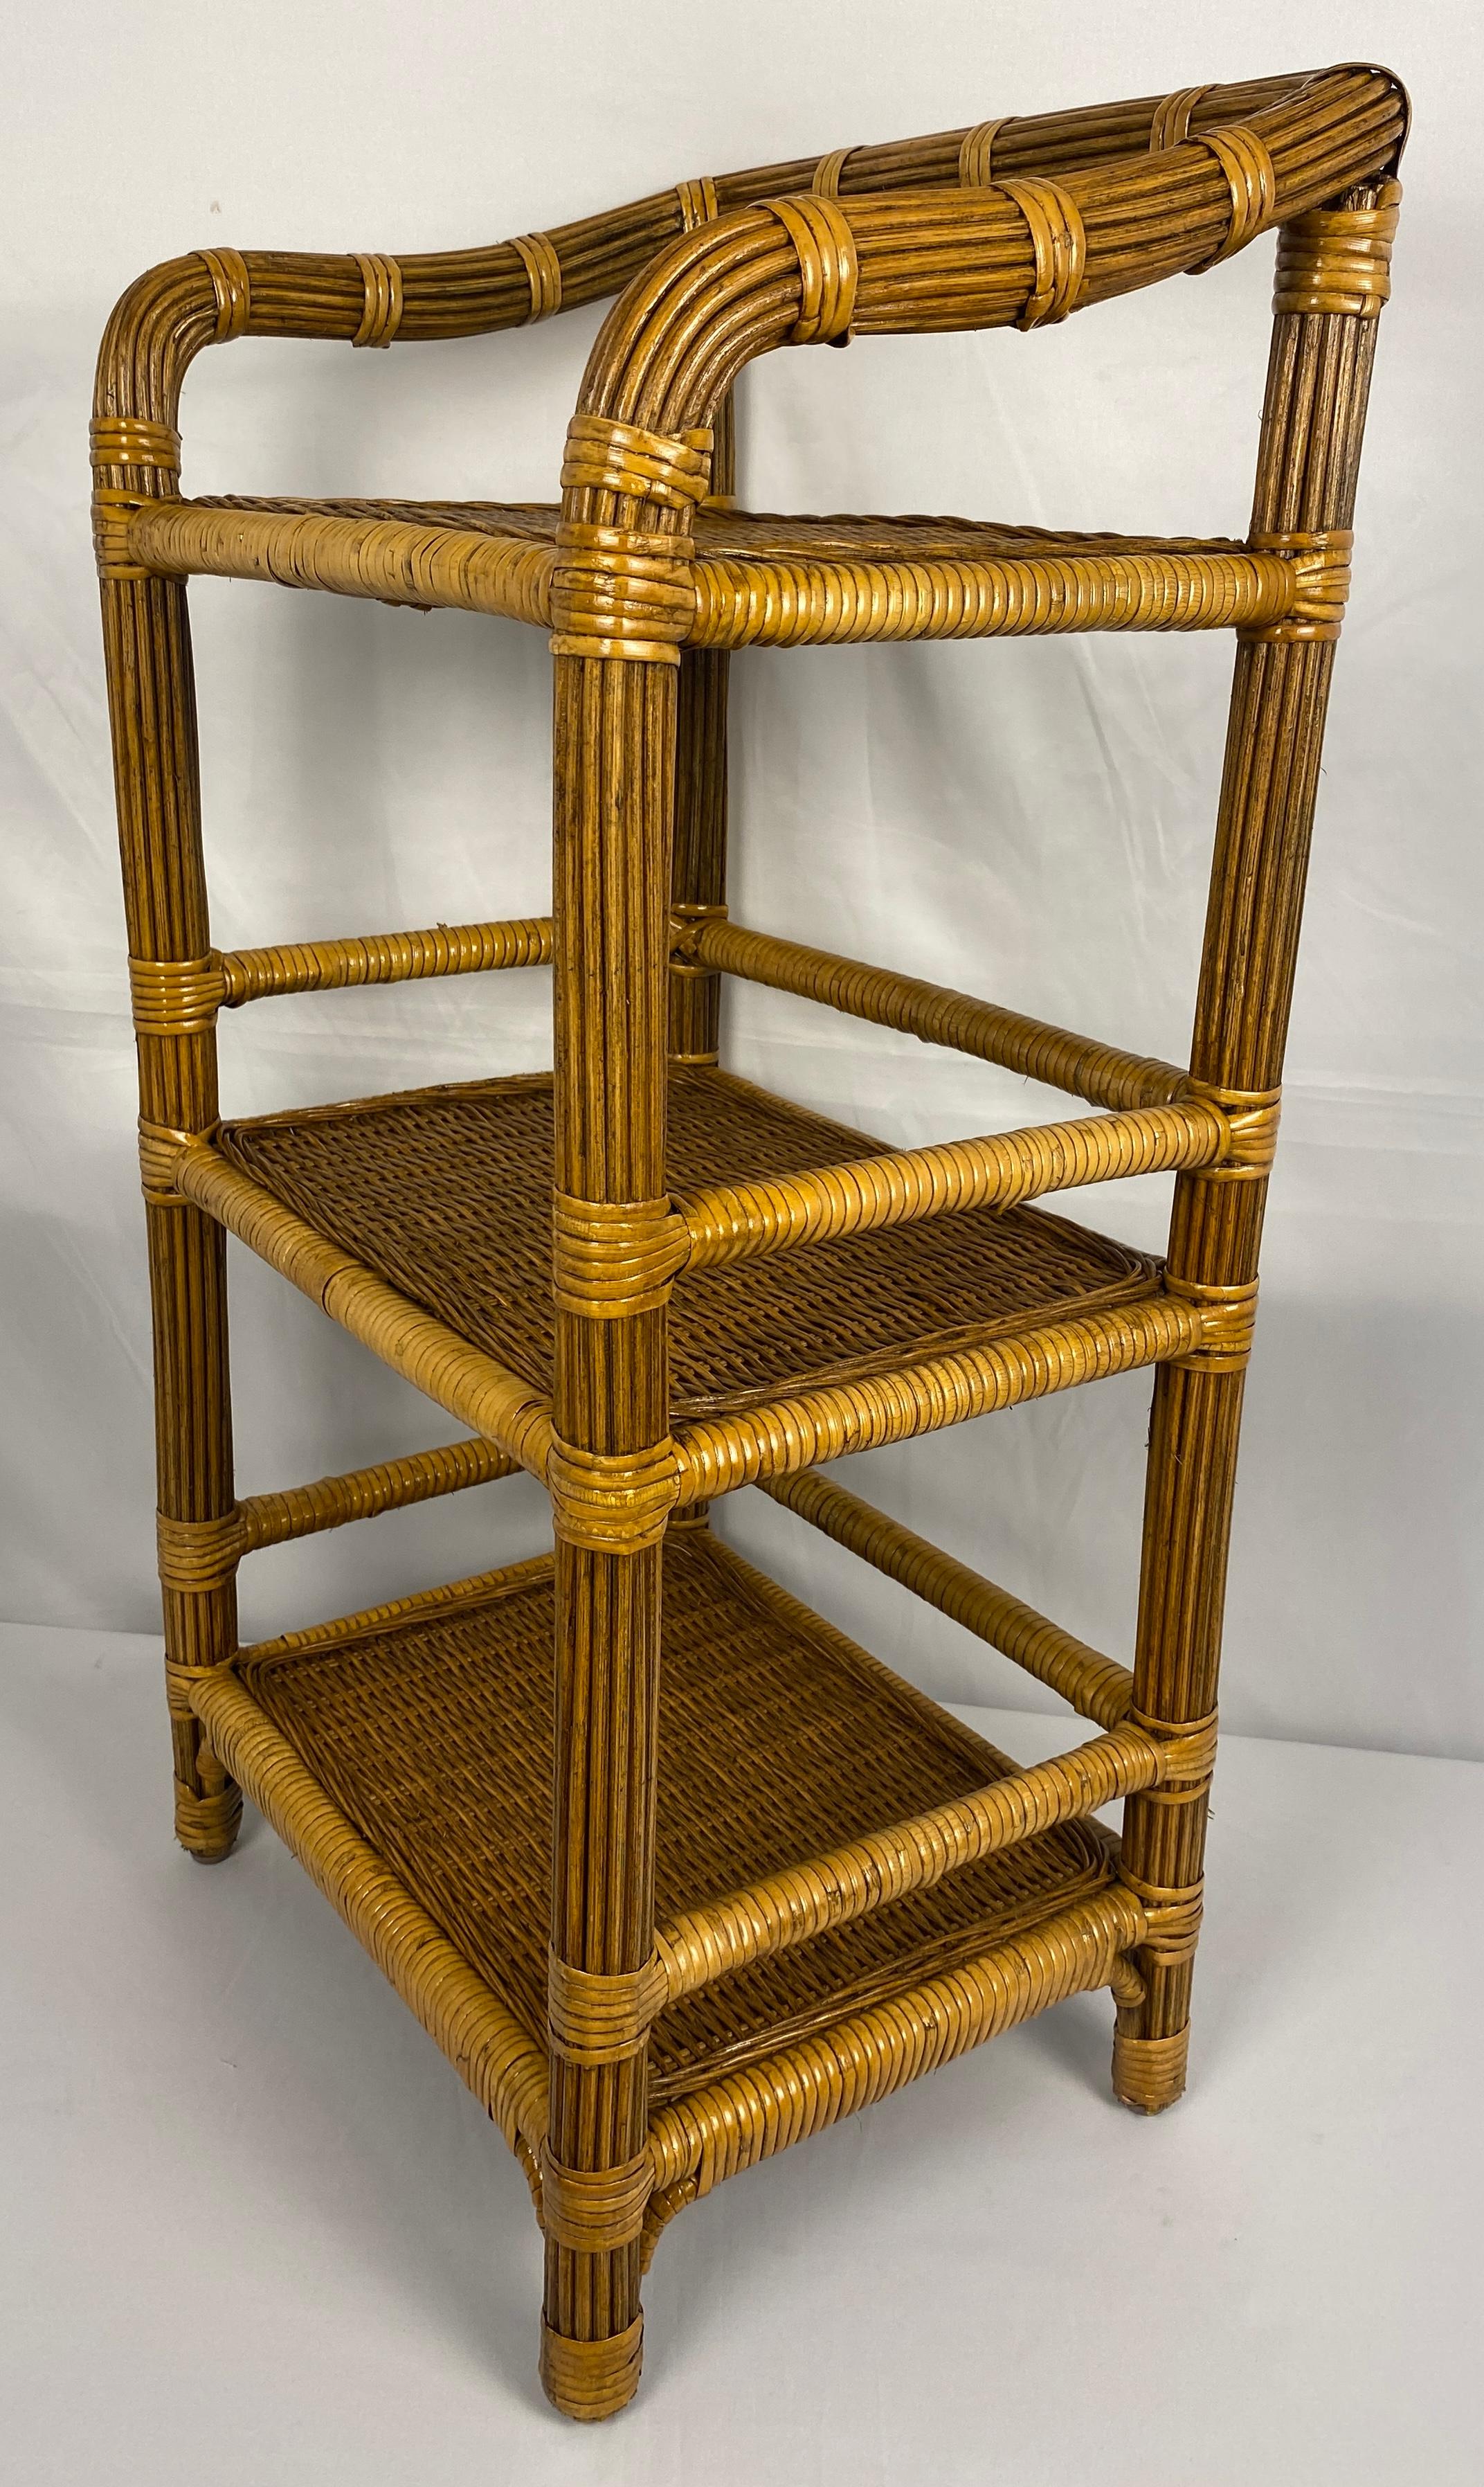 Vintage Rattan Side Table with 3 Shelves For Sale 1